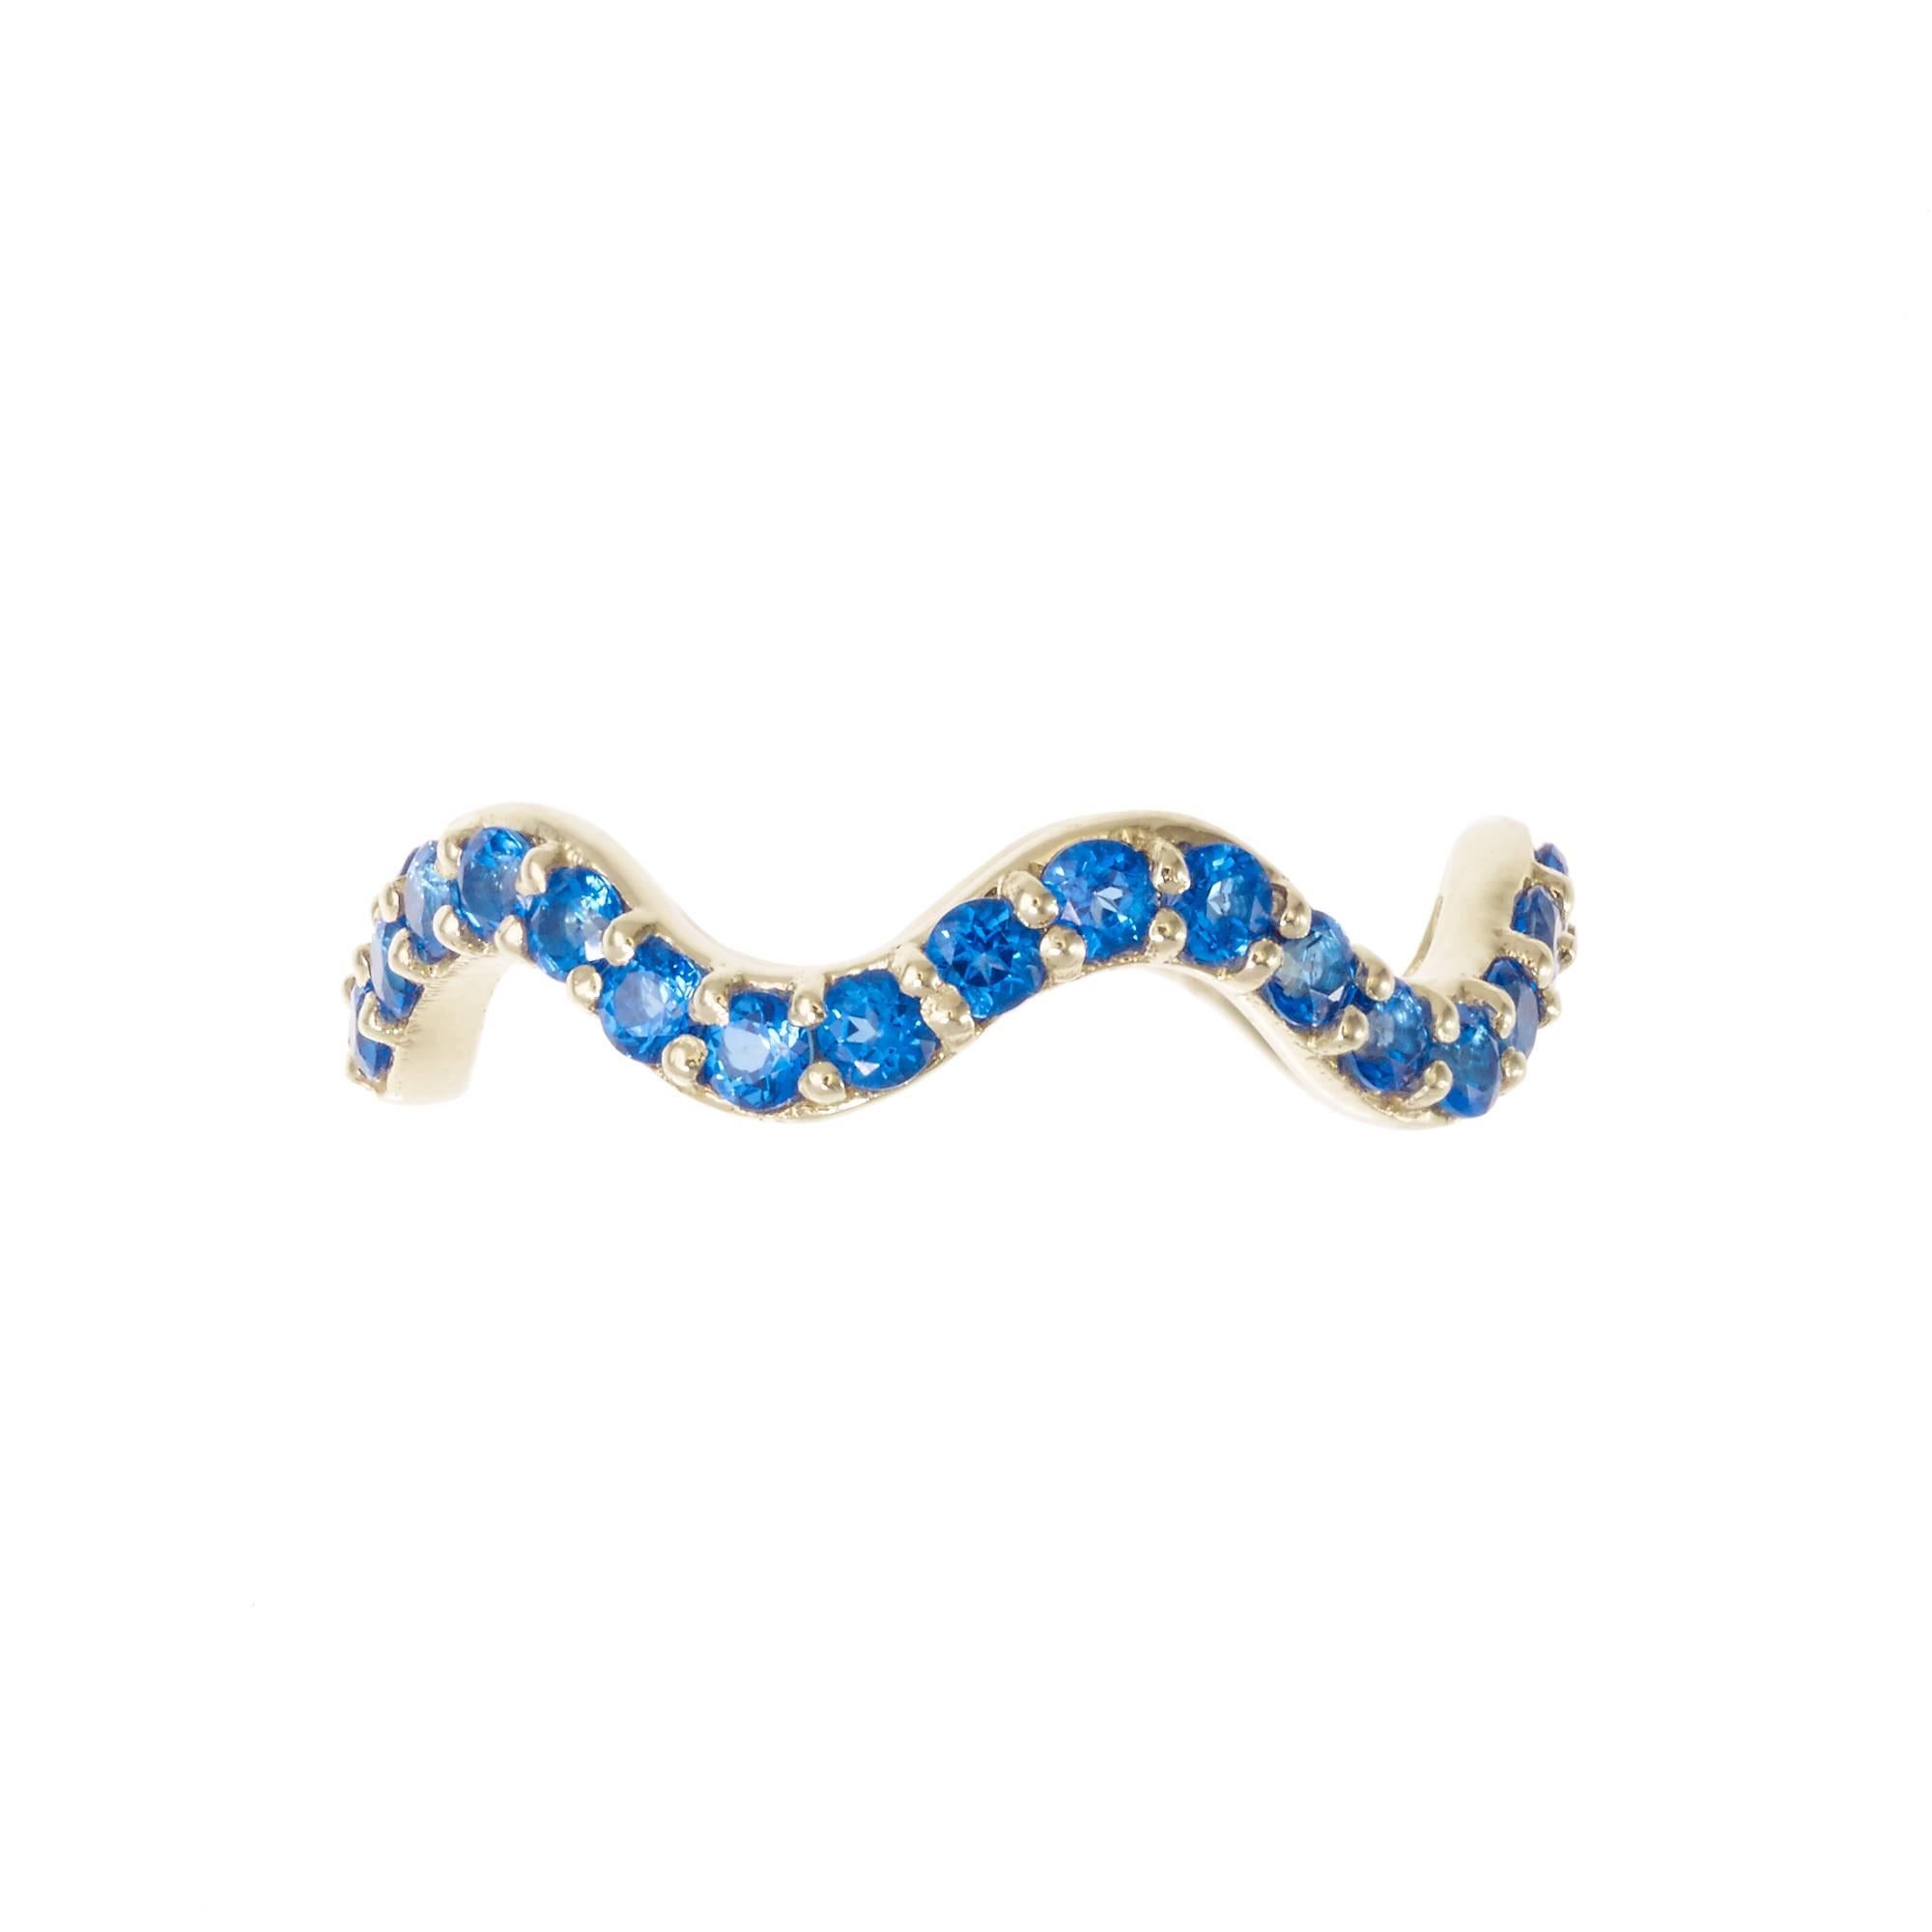 *MADE TO ORDER - 5 WEEK LEAD TIME*

Sabine Getty wiggly band in 18k yellow gold set with blue topaz

Topaz: 1.32ct

Yellow, pink, green and blue. Four colours inspired by the Memphis Group, the kookiest of Made in Italy designers, for a